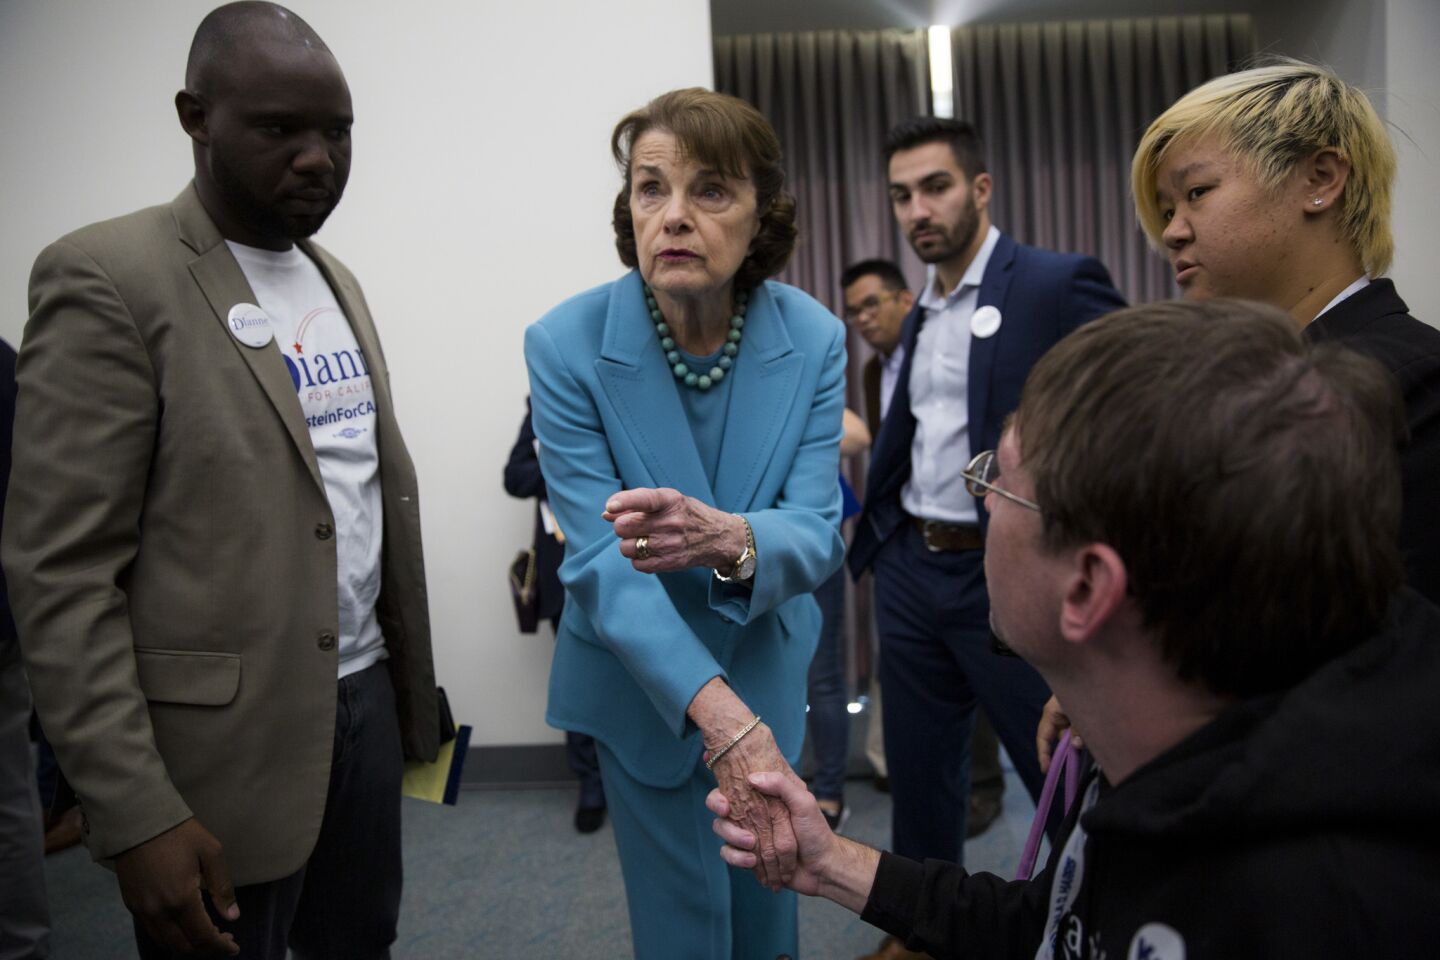 Senator Dianne Feinstein greets people after speaking to the Environmental Caucus at the Democrats State Convention.